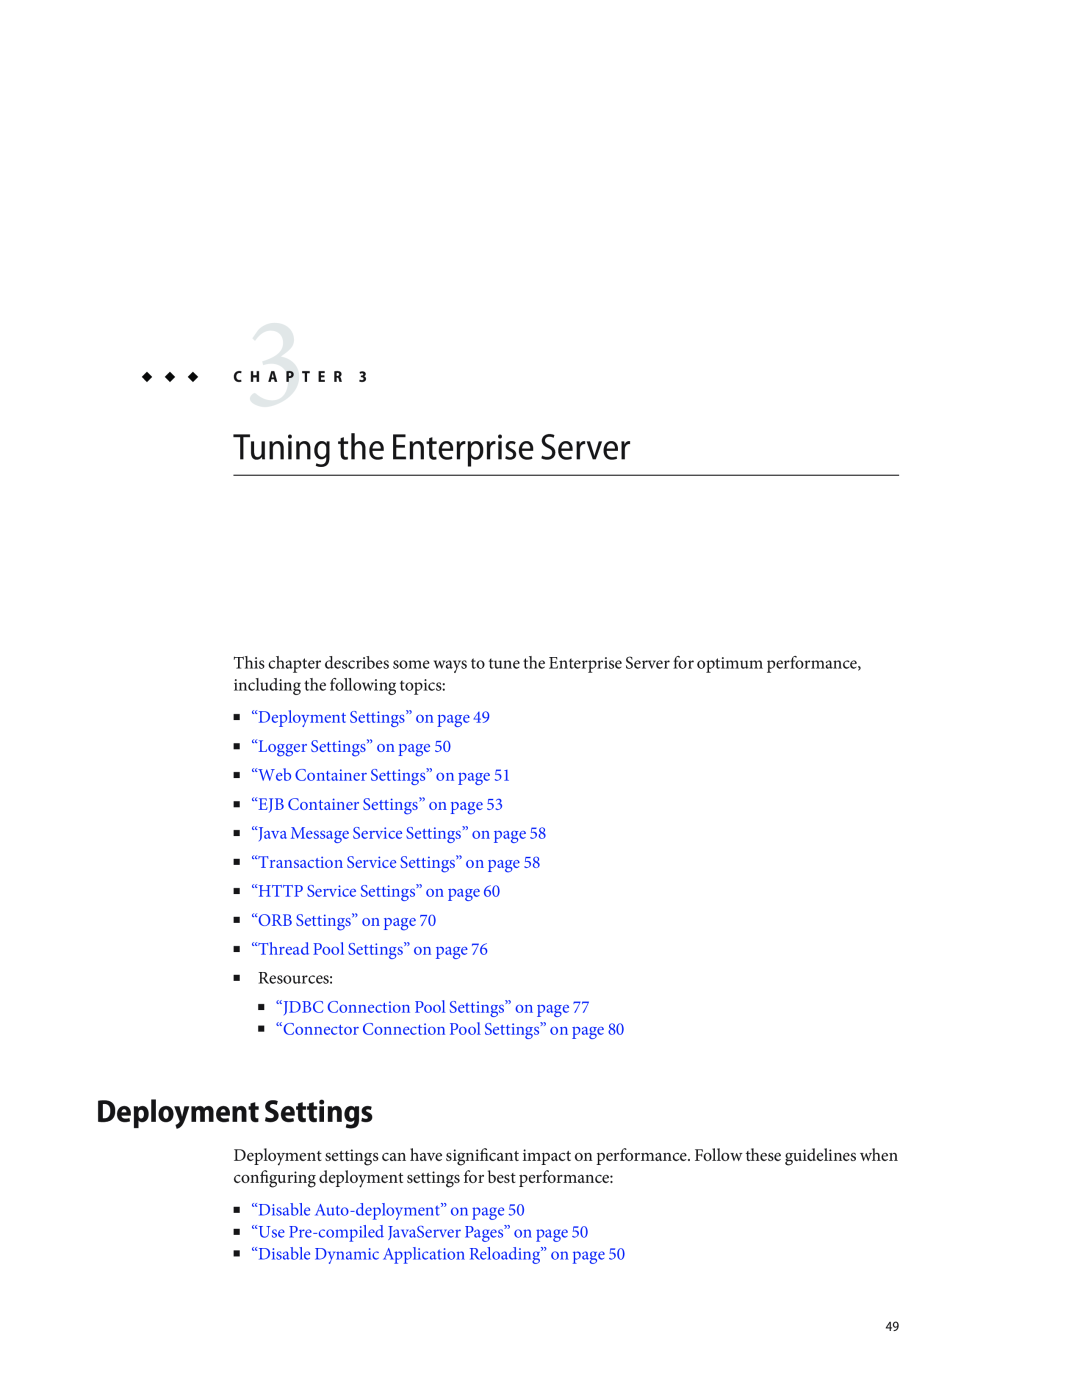 Sun Microsystems 820434310 Tuning the Enterprise Server, Deployment Settings, “Java Message Service Settings” on page 